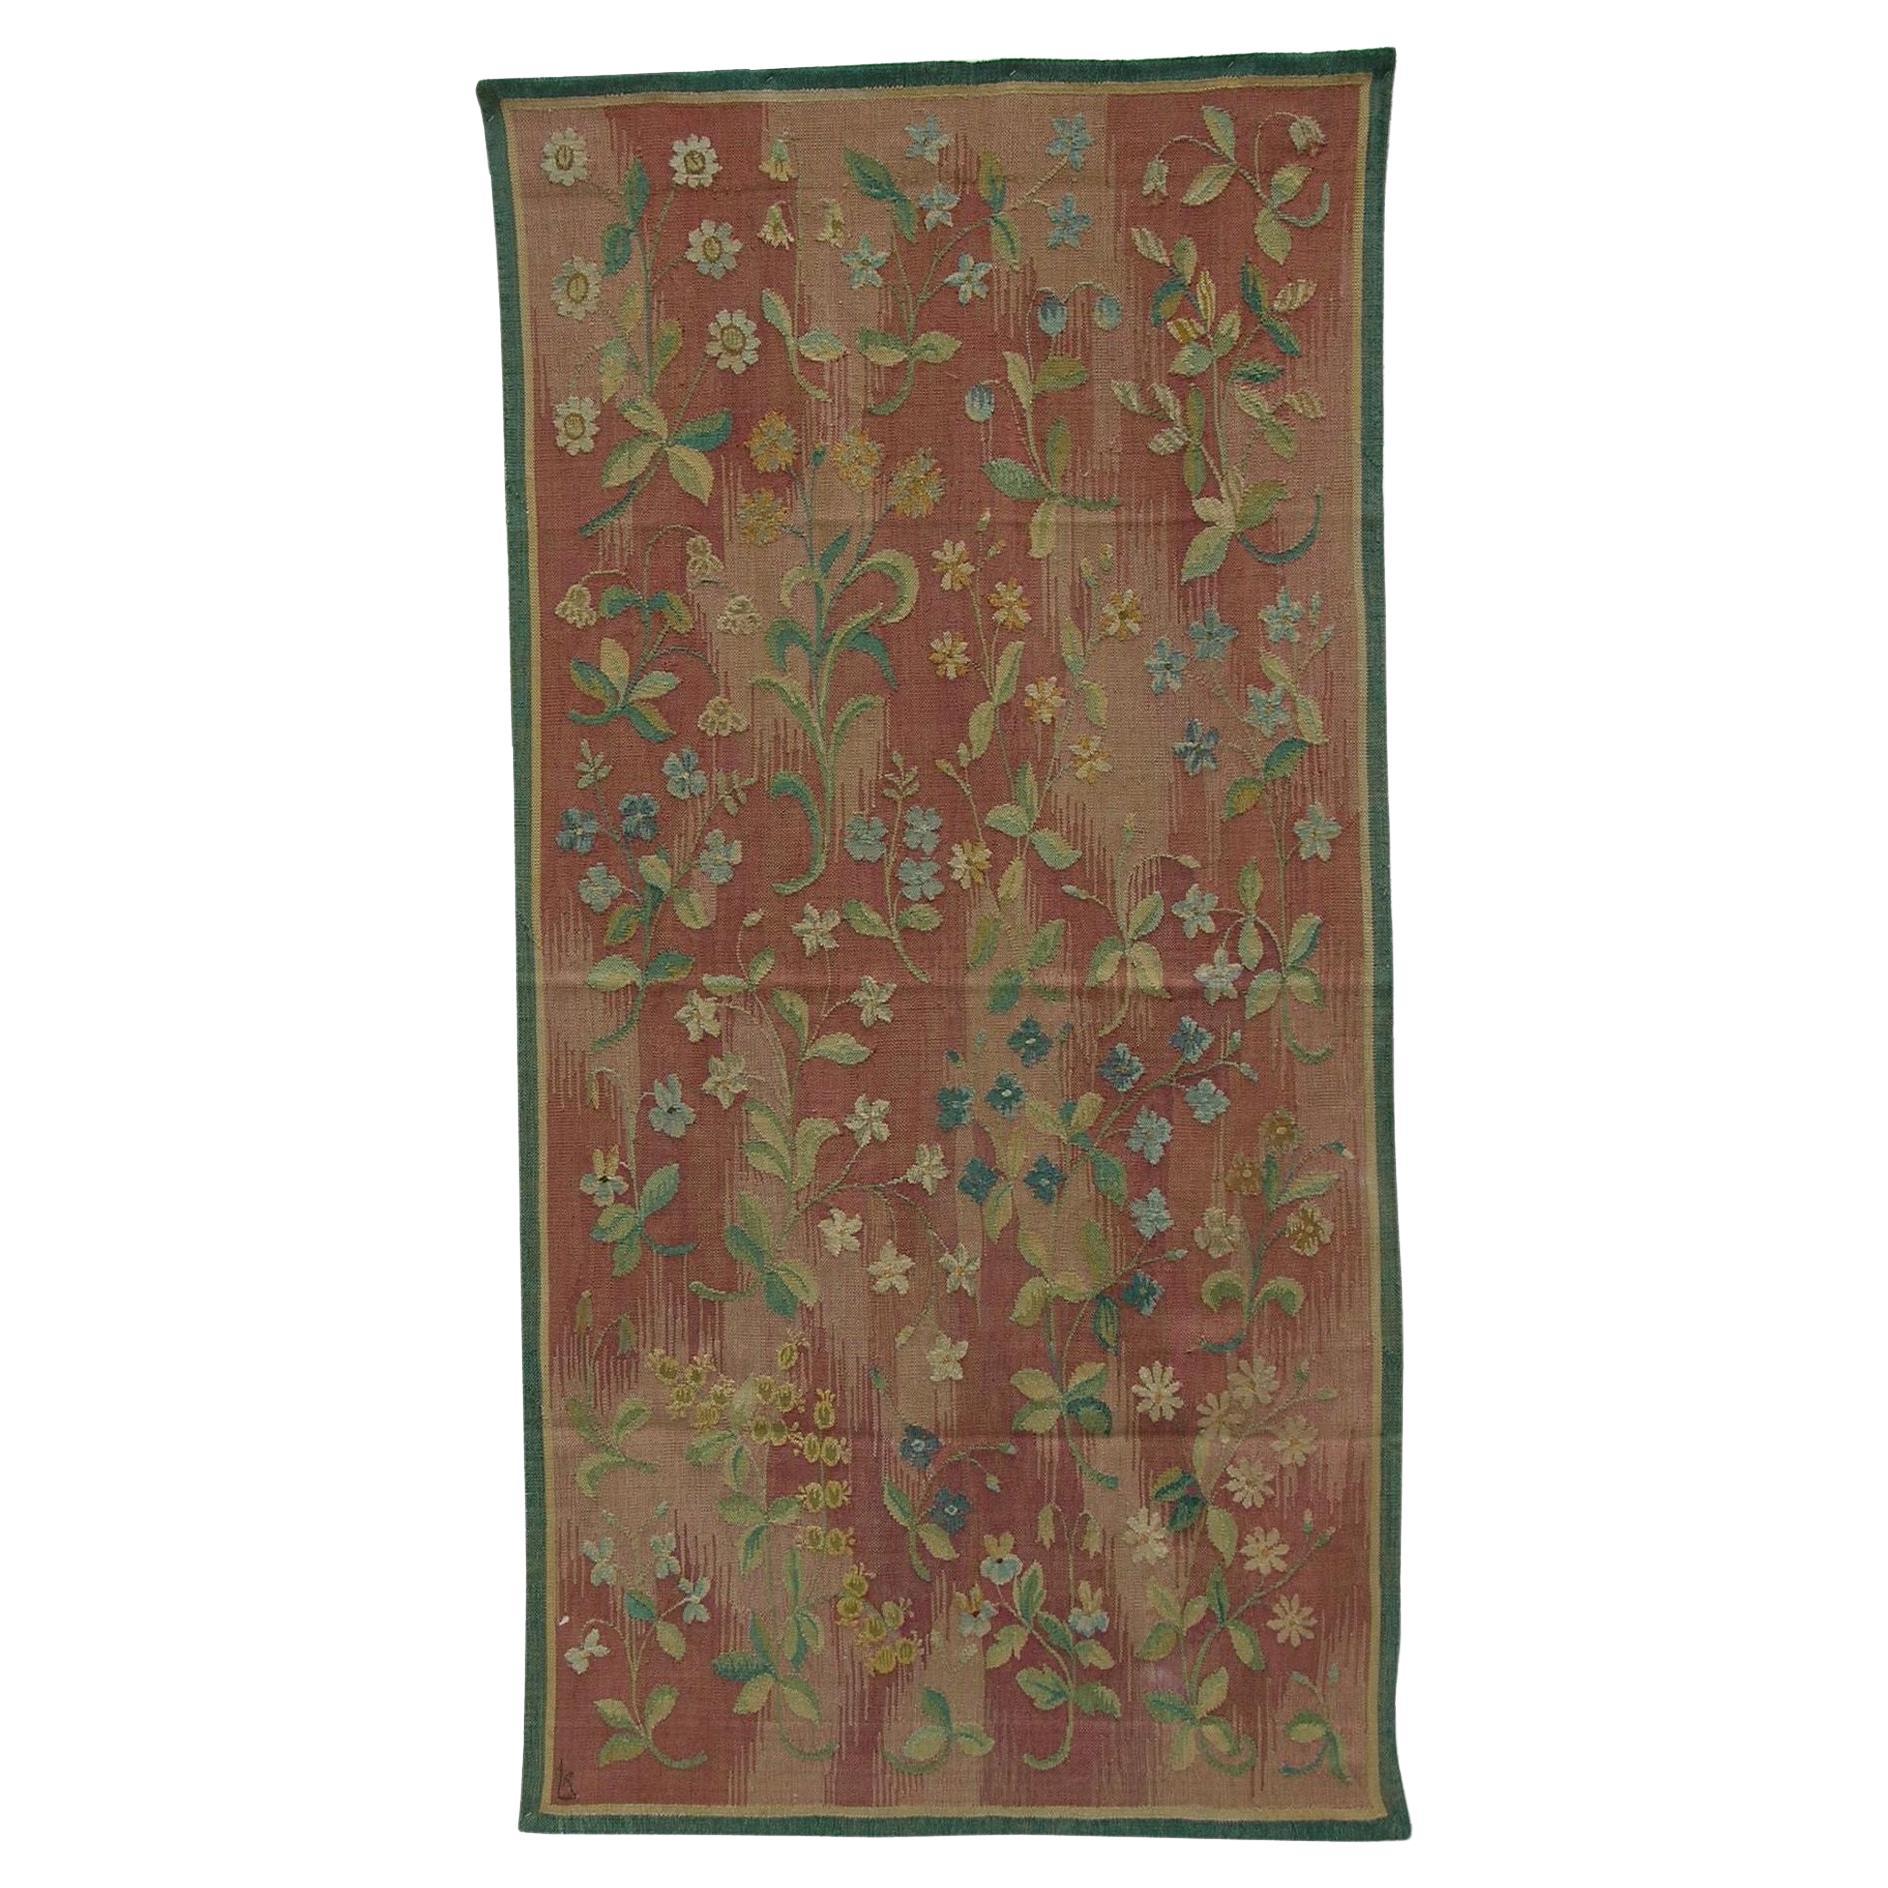 Antique 1900 French Tapestry 7'9" X 3'10" For Sale